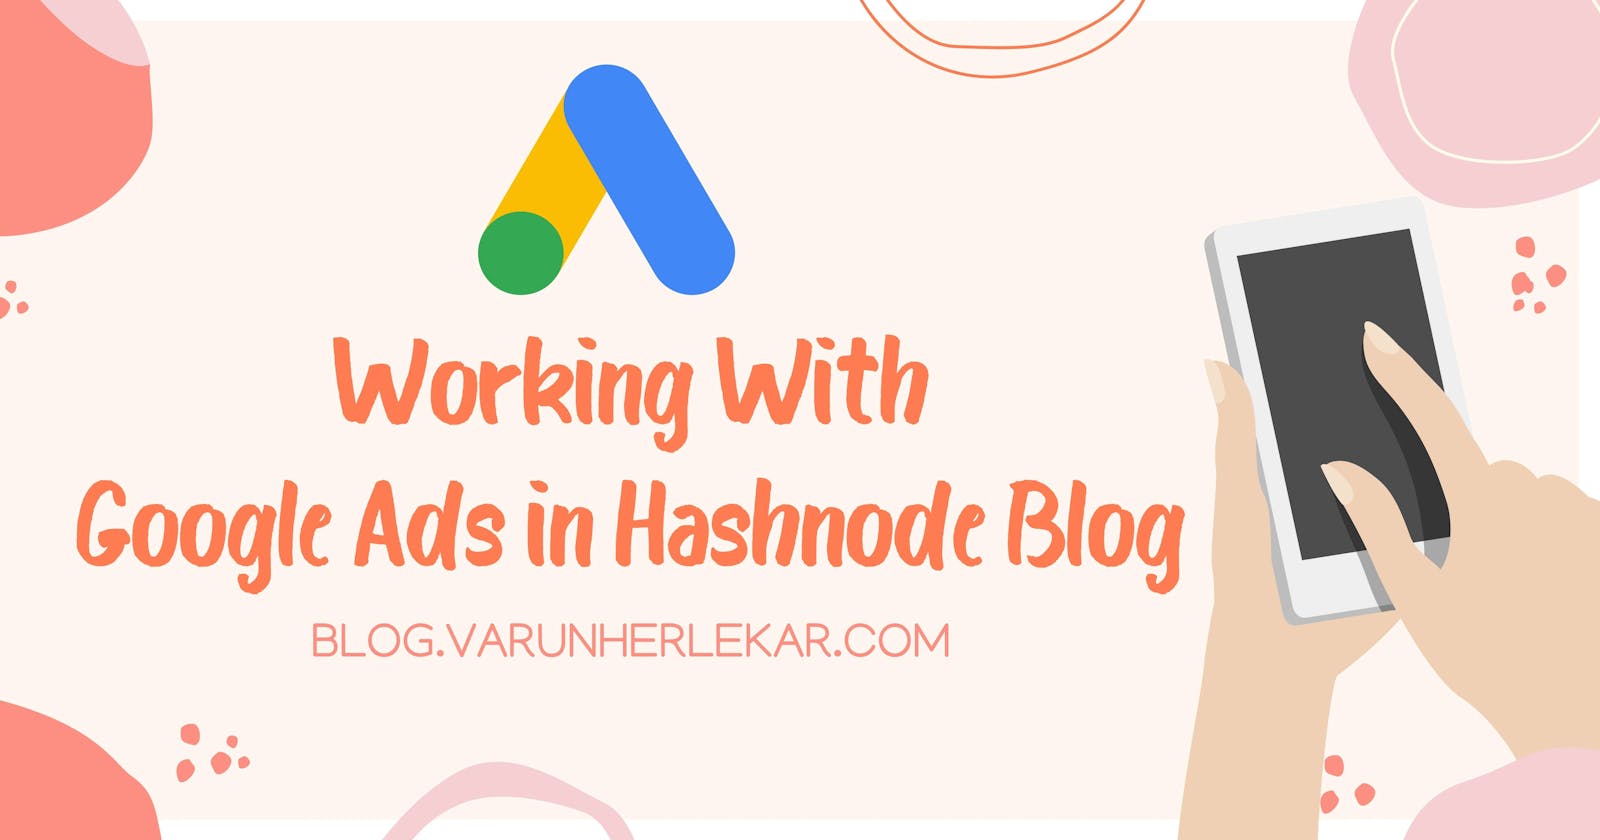 Working with Google Ads in Hashnode Blog